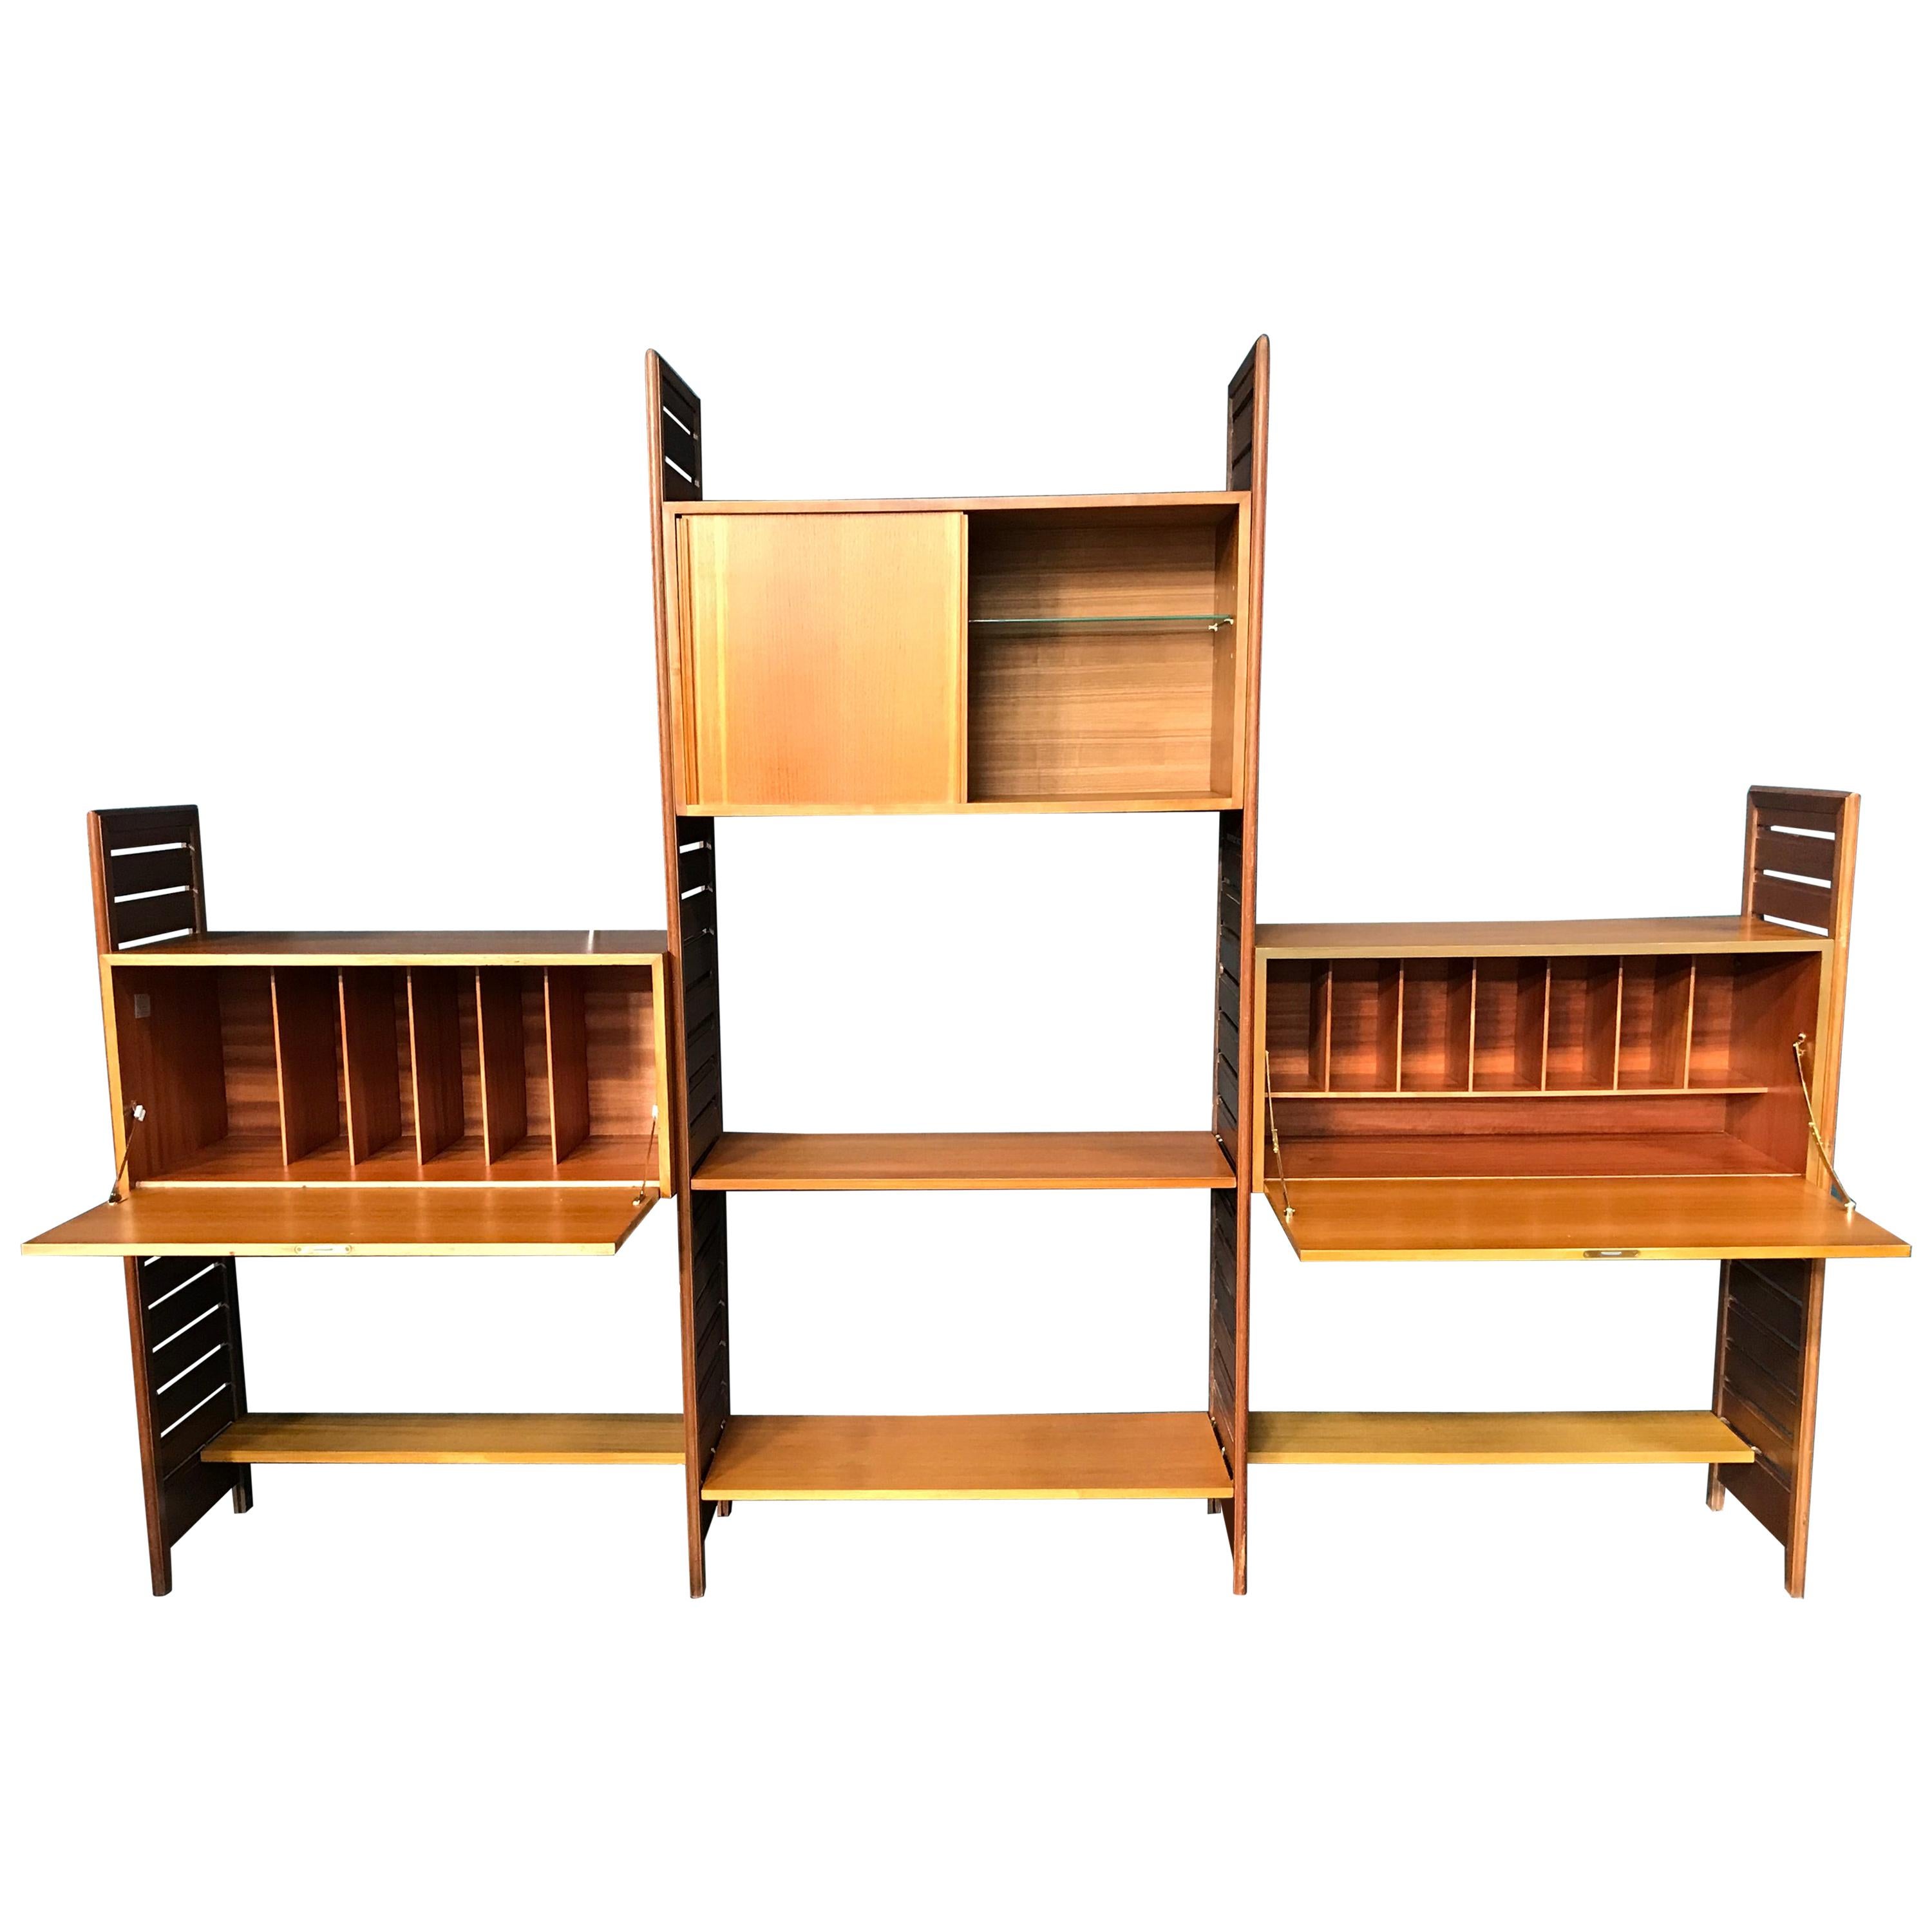 3-Bay Ladderax Teak Midcentury Shelving System by Robert Heal for Staples For Sale